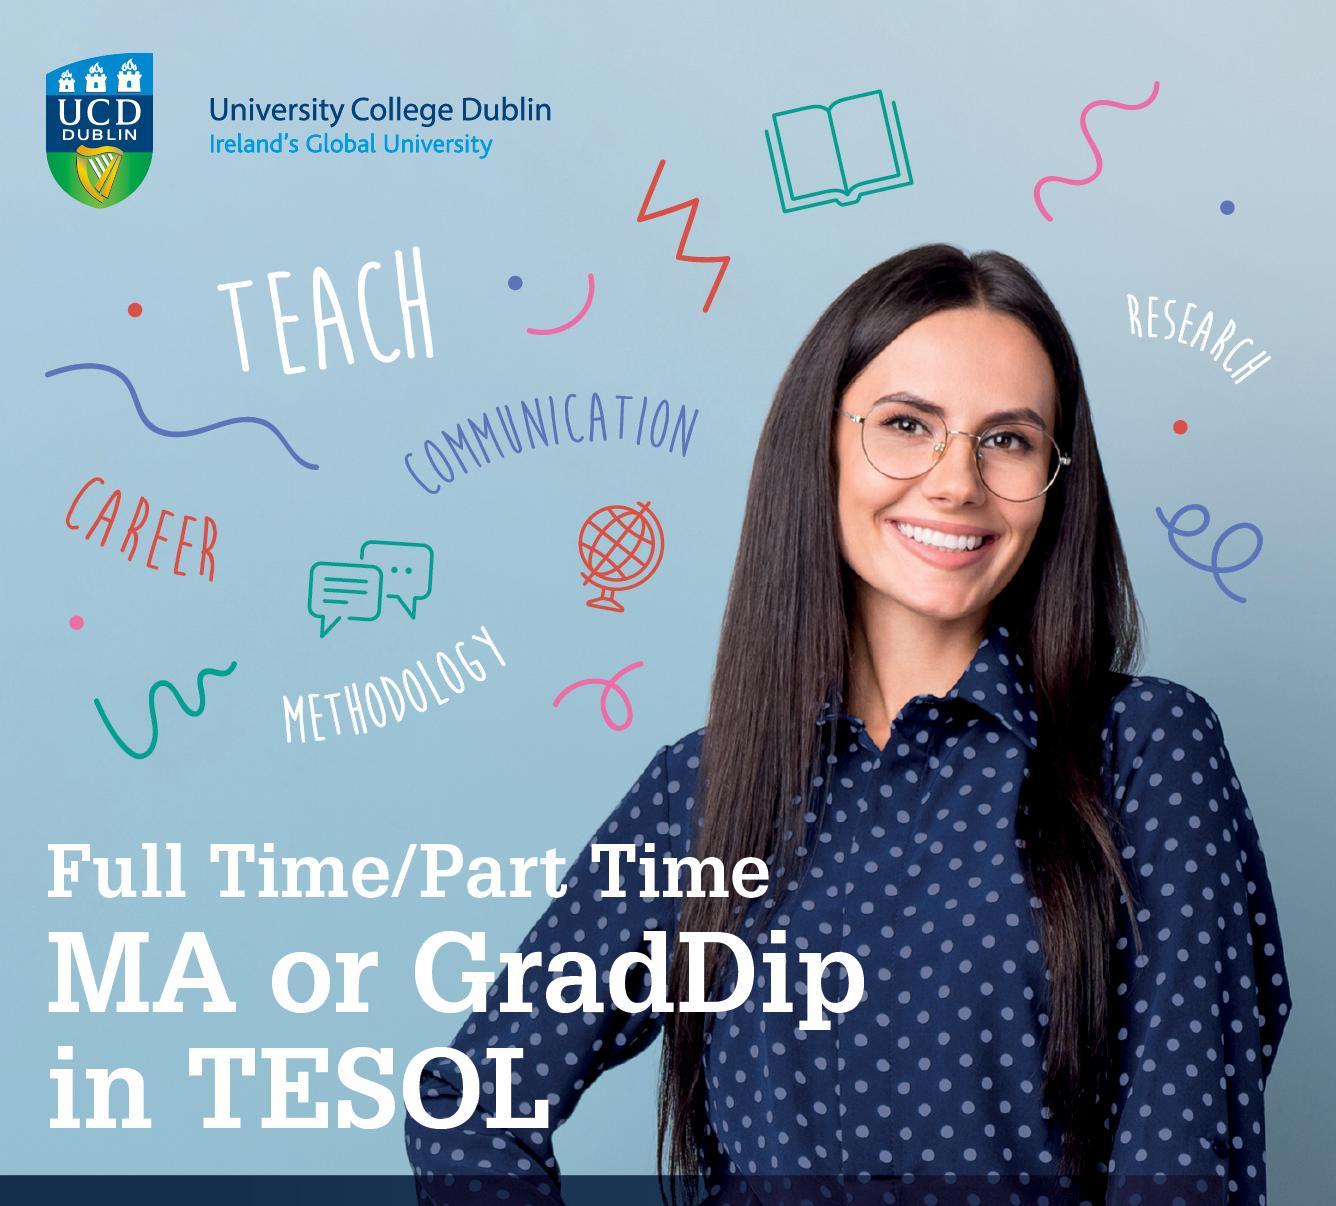 The MA and GradDip in TESOL are internationally recognised qualifications in the field of English language education.